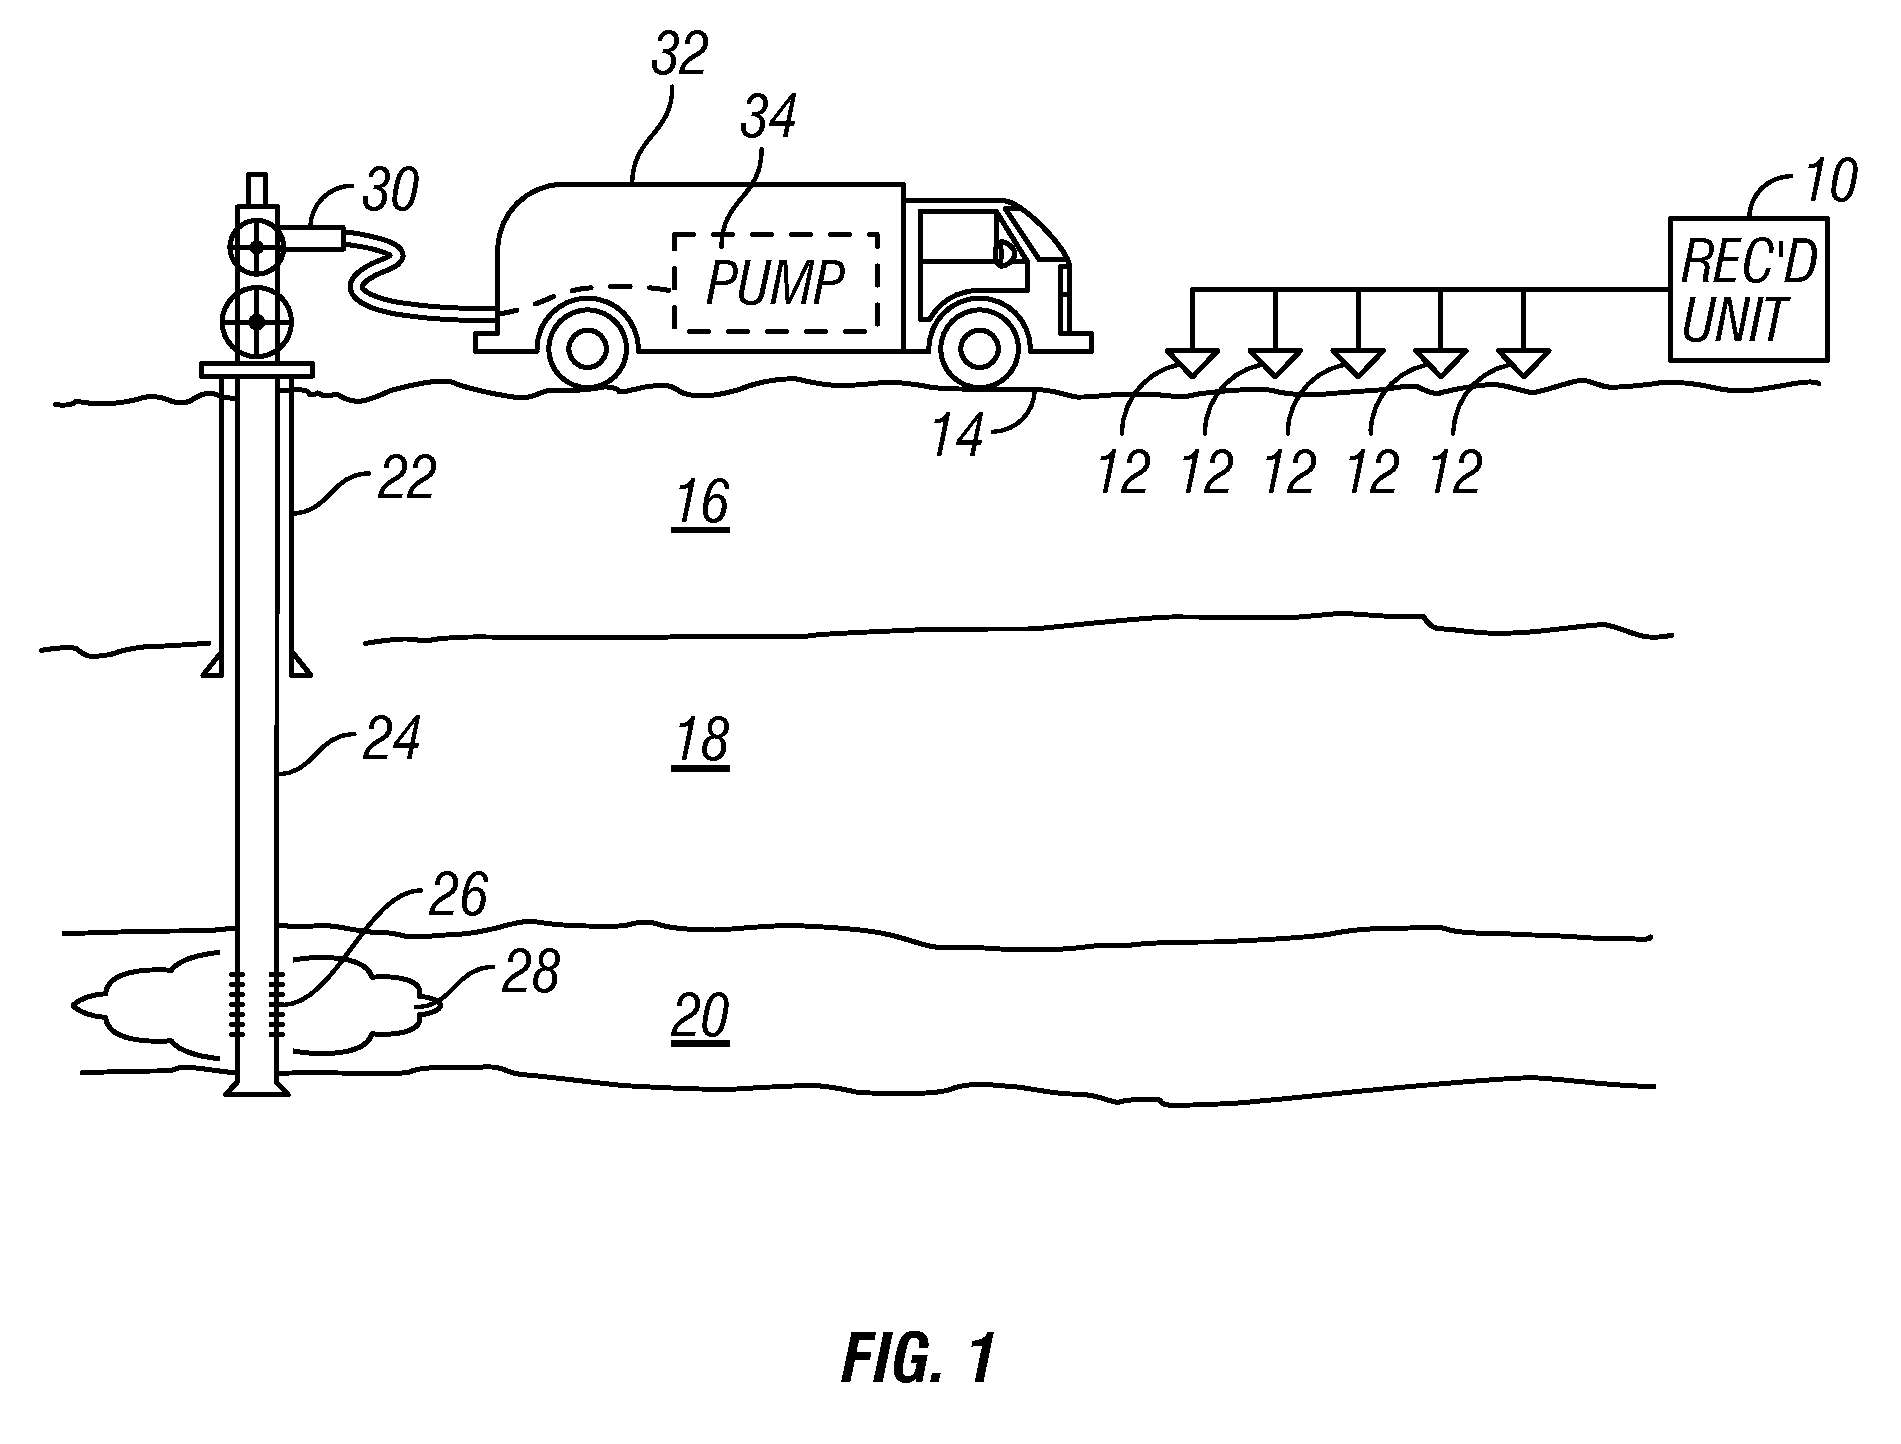 Method for imaging the earths subsurface using passive seismic interferometry and adaptive velocity filtering